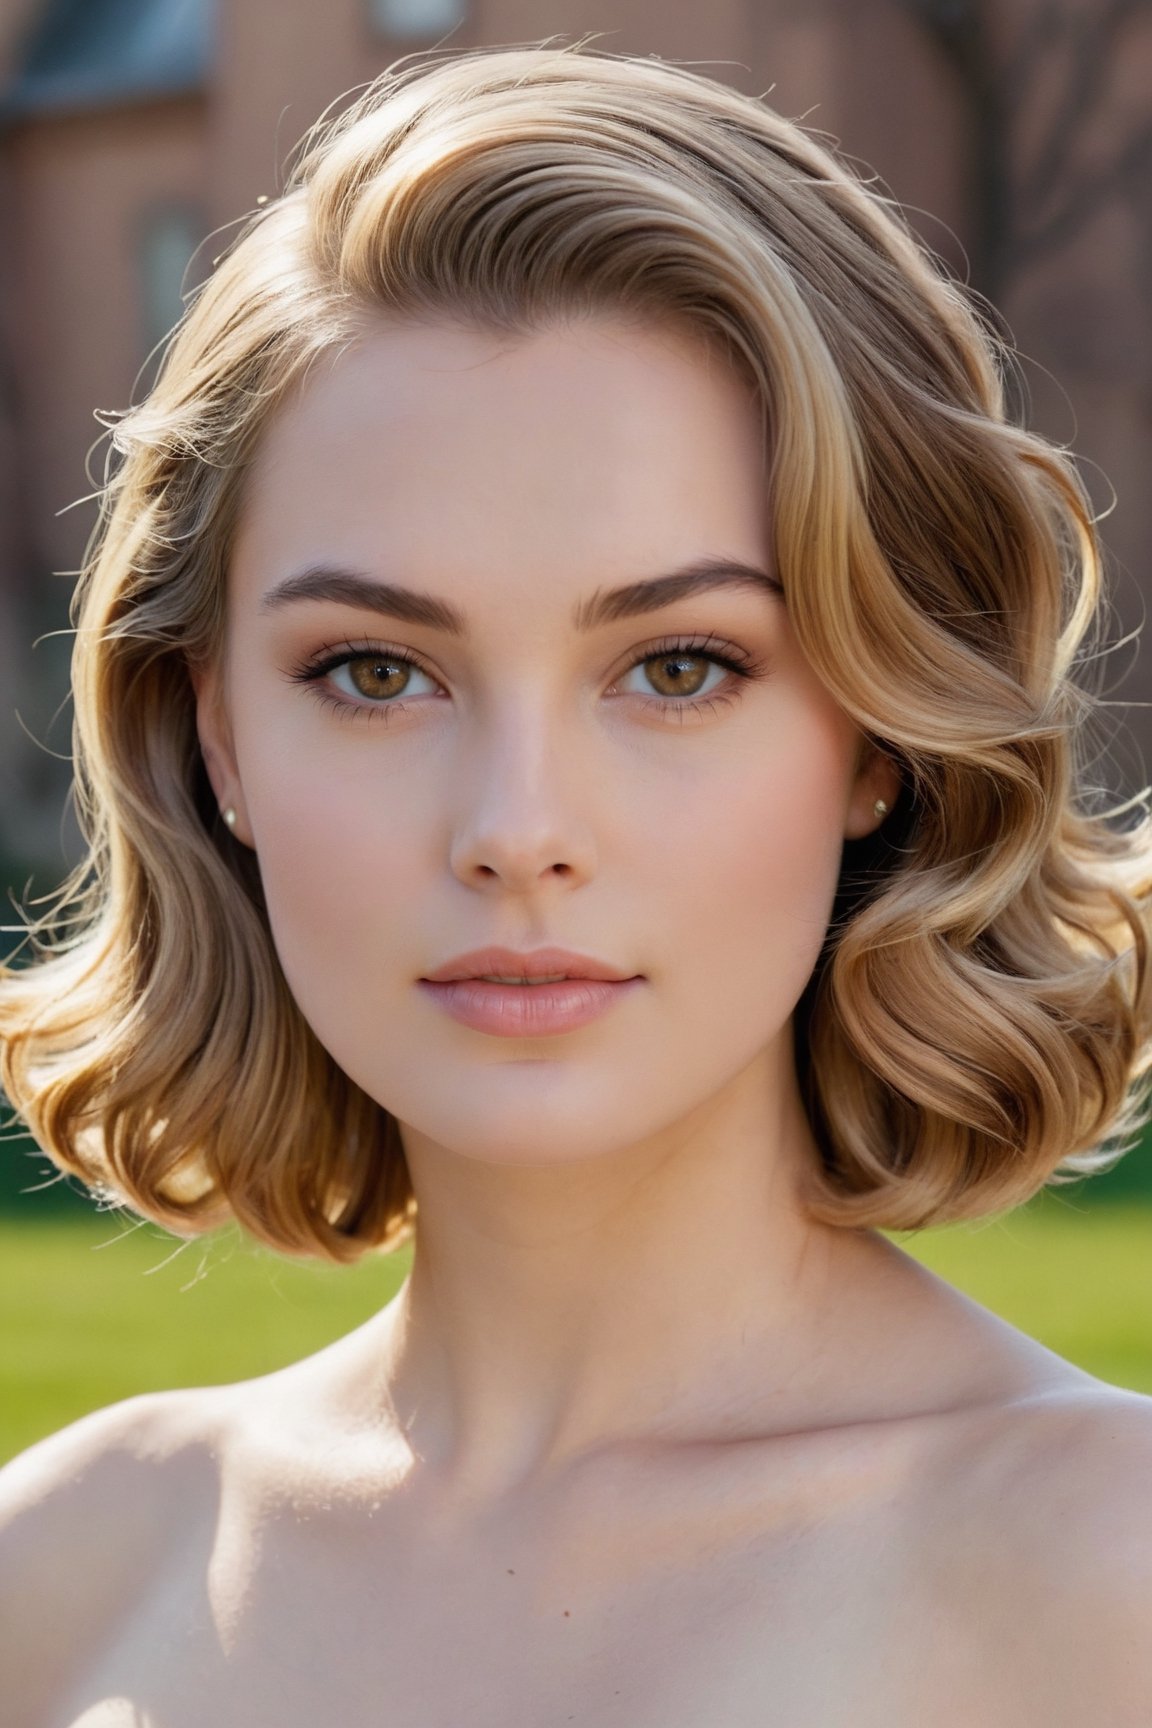 headshot,Nudity,Naked,Nude,No Clothes,Brown with golden highlights hair,face similar to Grace Kelly,Russian,pale skin,Wavy bob Hairstyle,Negative space makeup,21 year old,Boyish_normal_breasts,headshot,Sunny Day Spring,Posing for a photo




